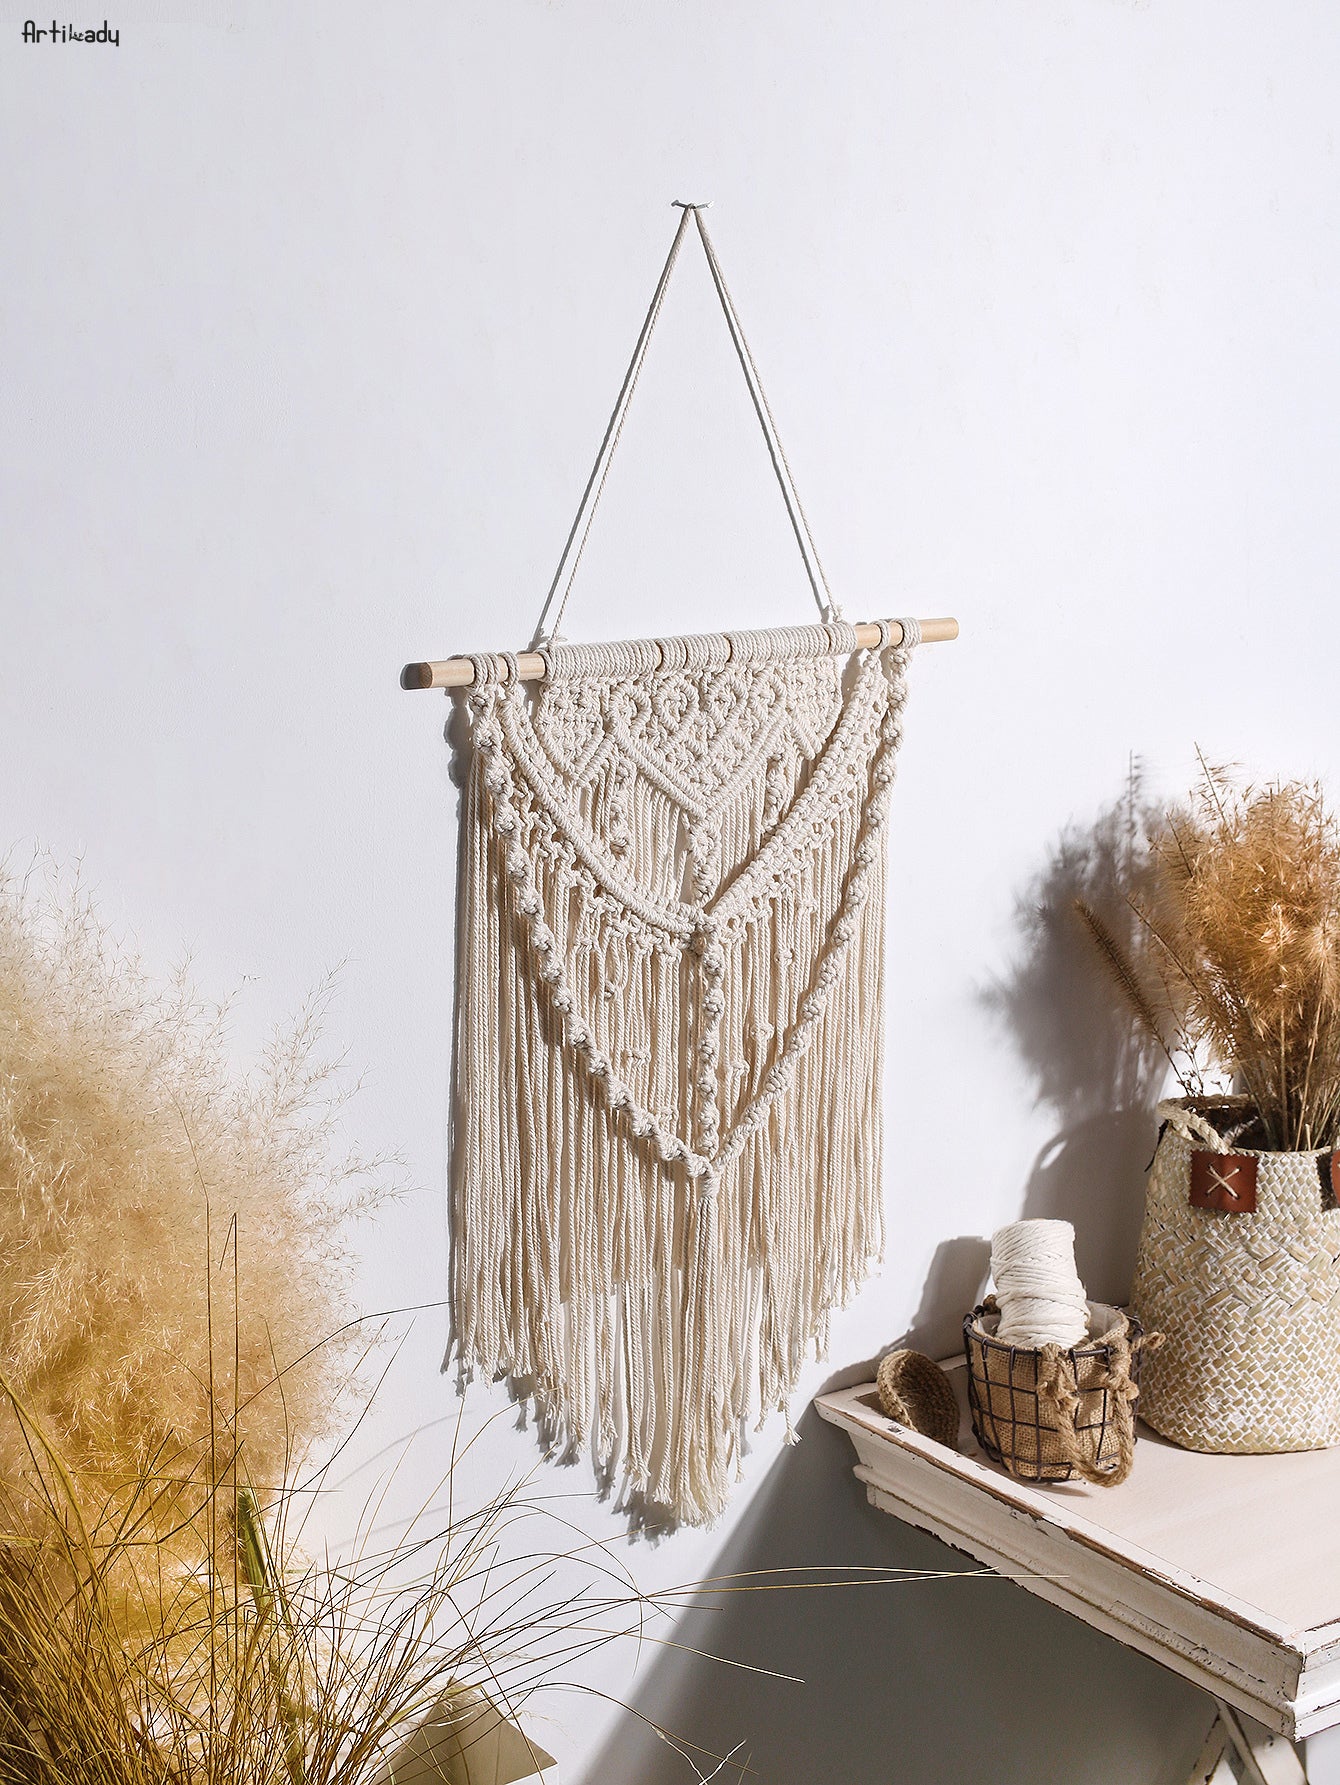 Macrame Woven Wall Hanging Tapestry, Dream Catcher Wall Hanging, Boho Chic  Bohemian Home Decor Handmade Woven Cotton Decoration 